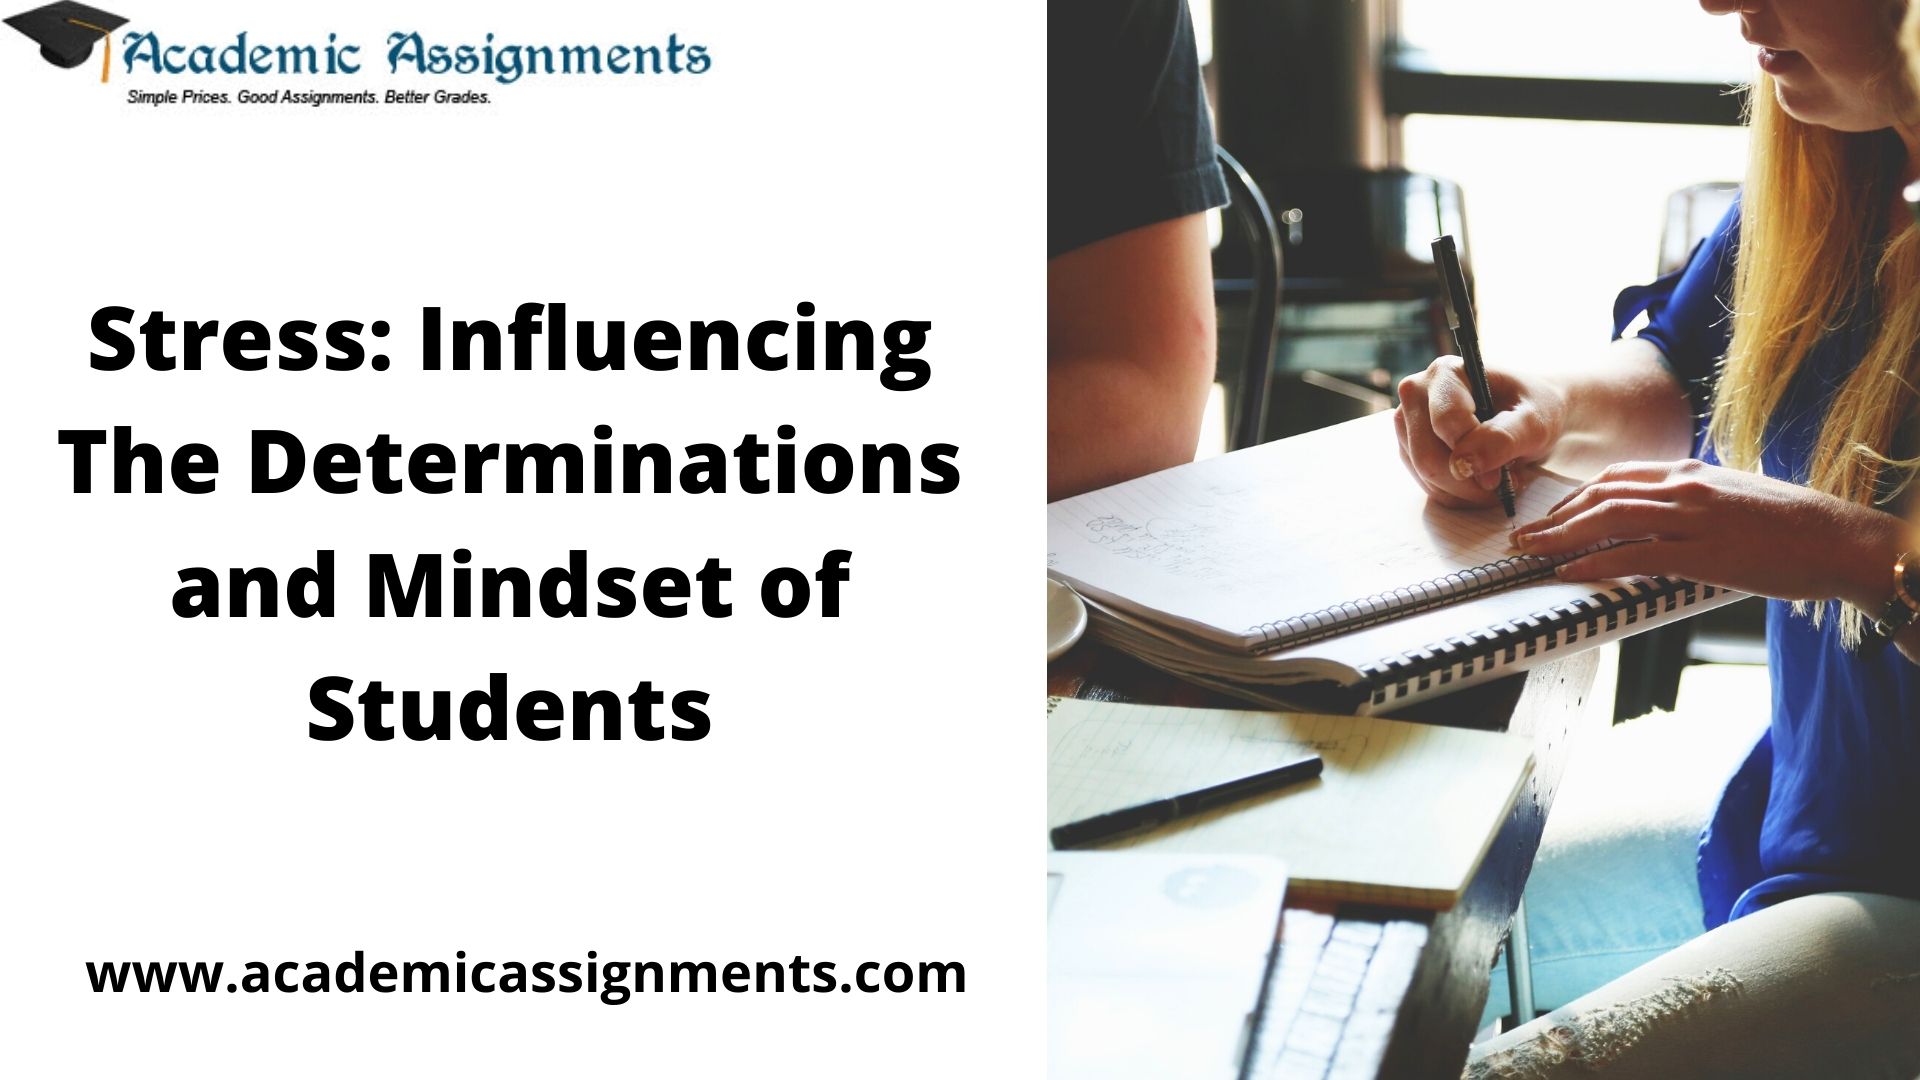 Influencing The Determinations and Mindset of Students